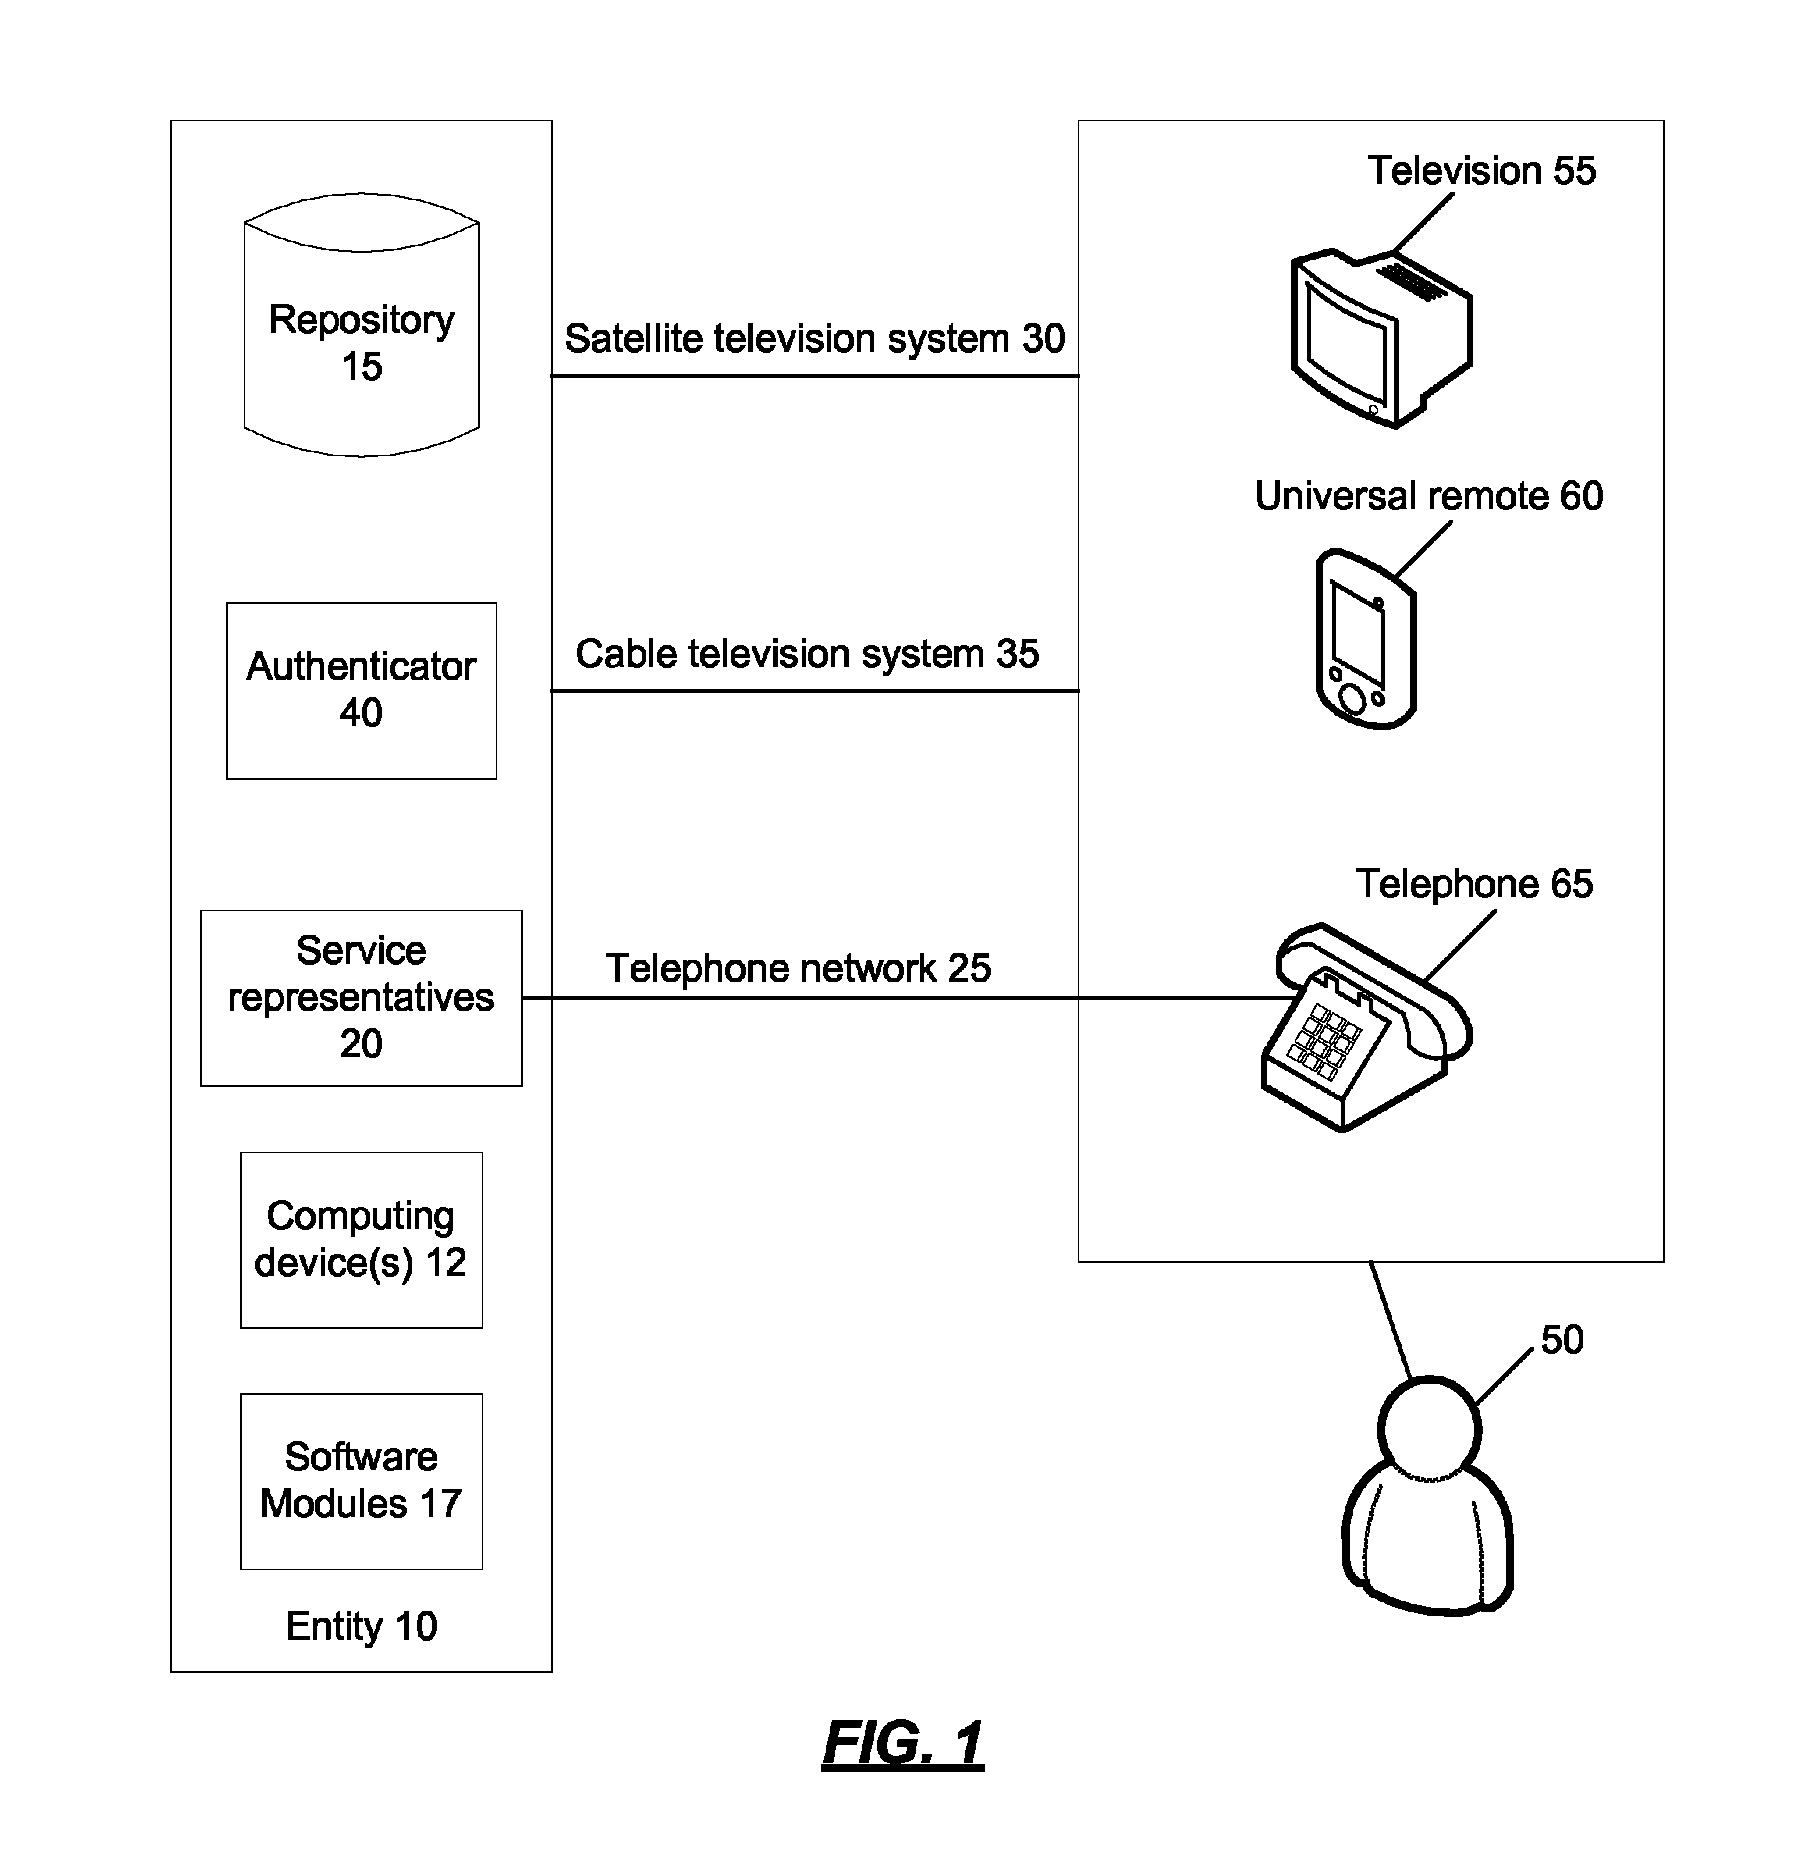 Systems and methods for providing self-services over television